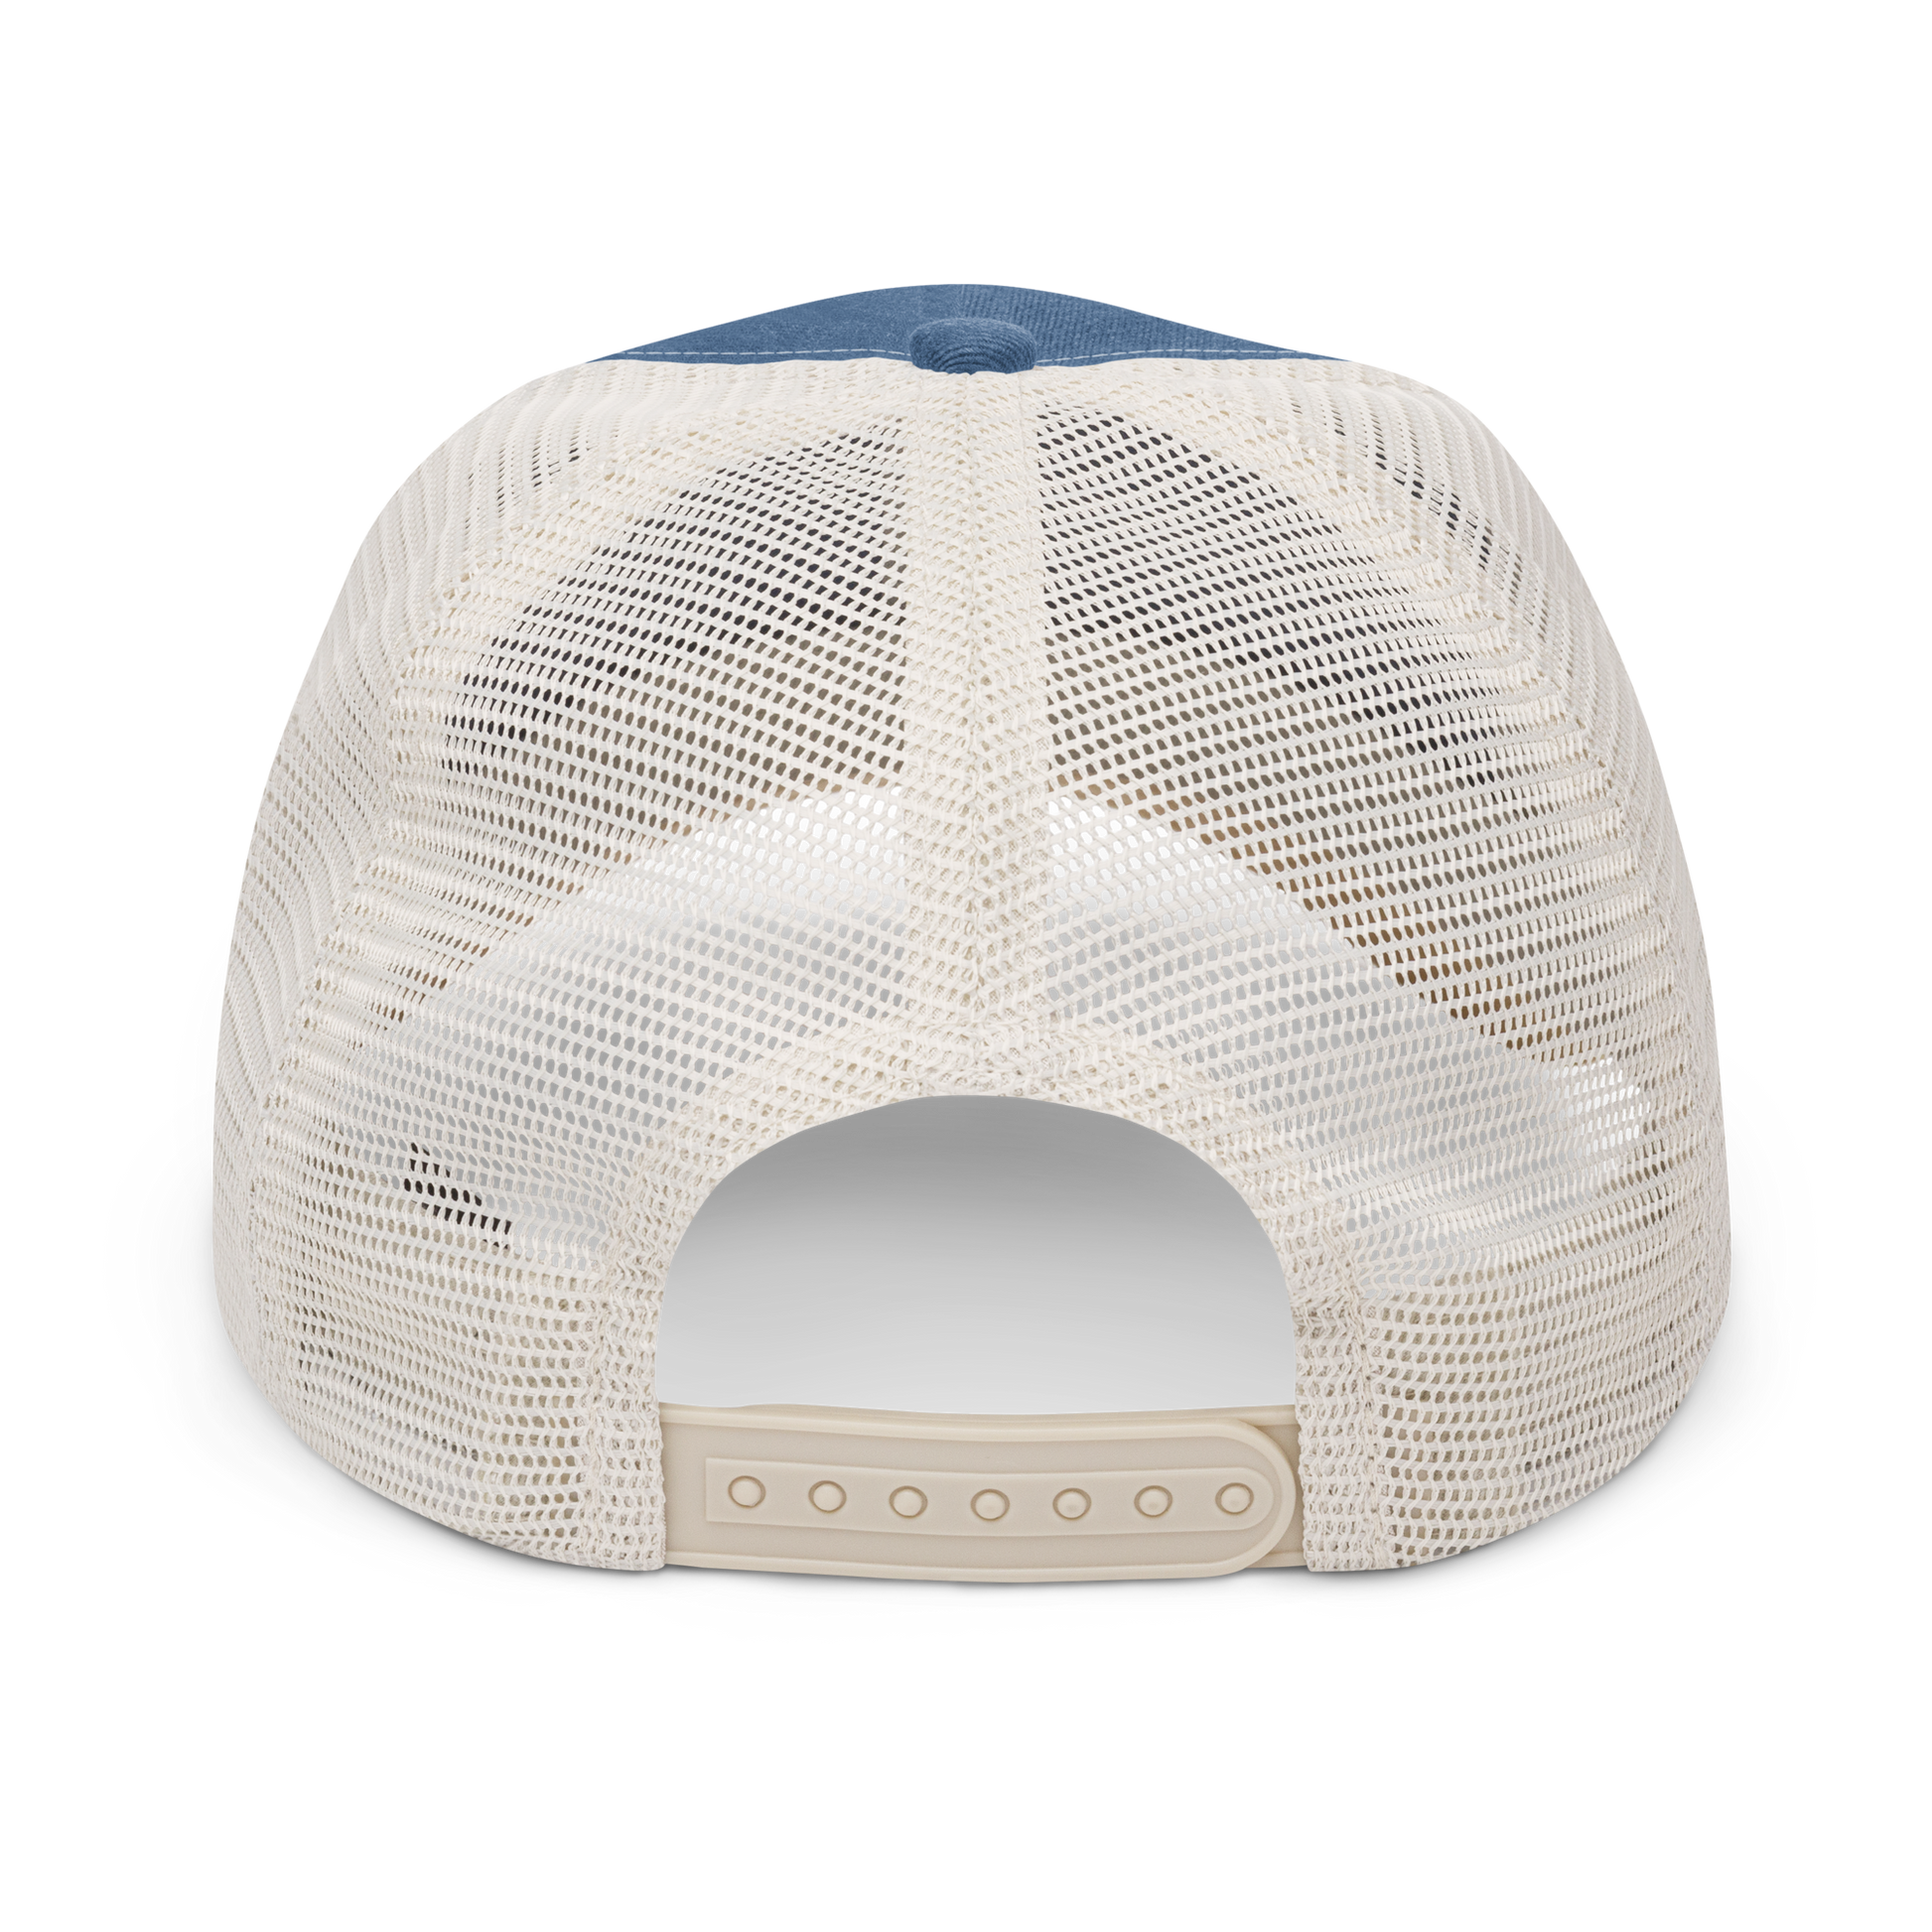 YHM Designs - YQR Regina Pigment-Dyed Trucker Cap - Crossed-X Design with Airport Code and Vintage Propliner - White Embroidery - Image 19